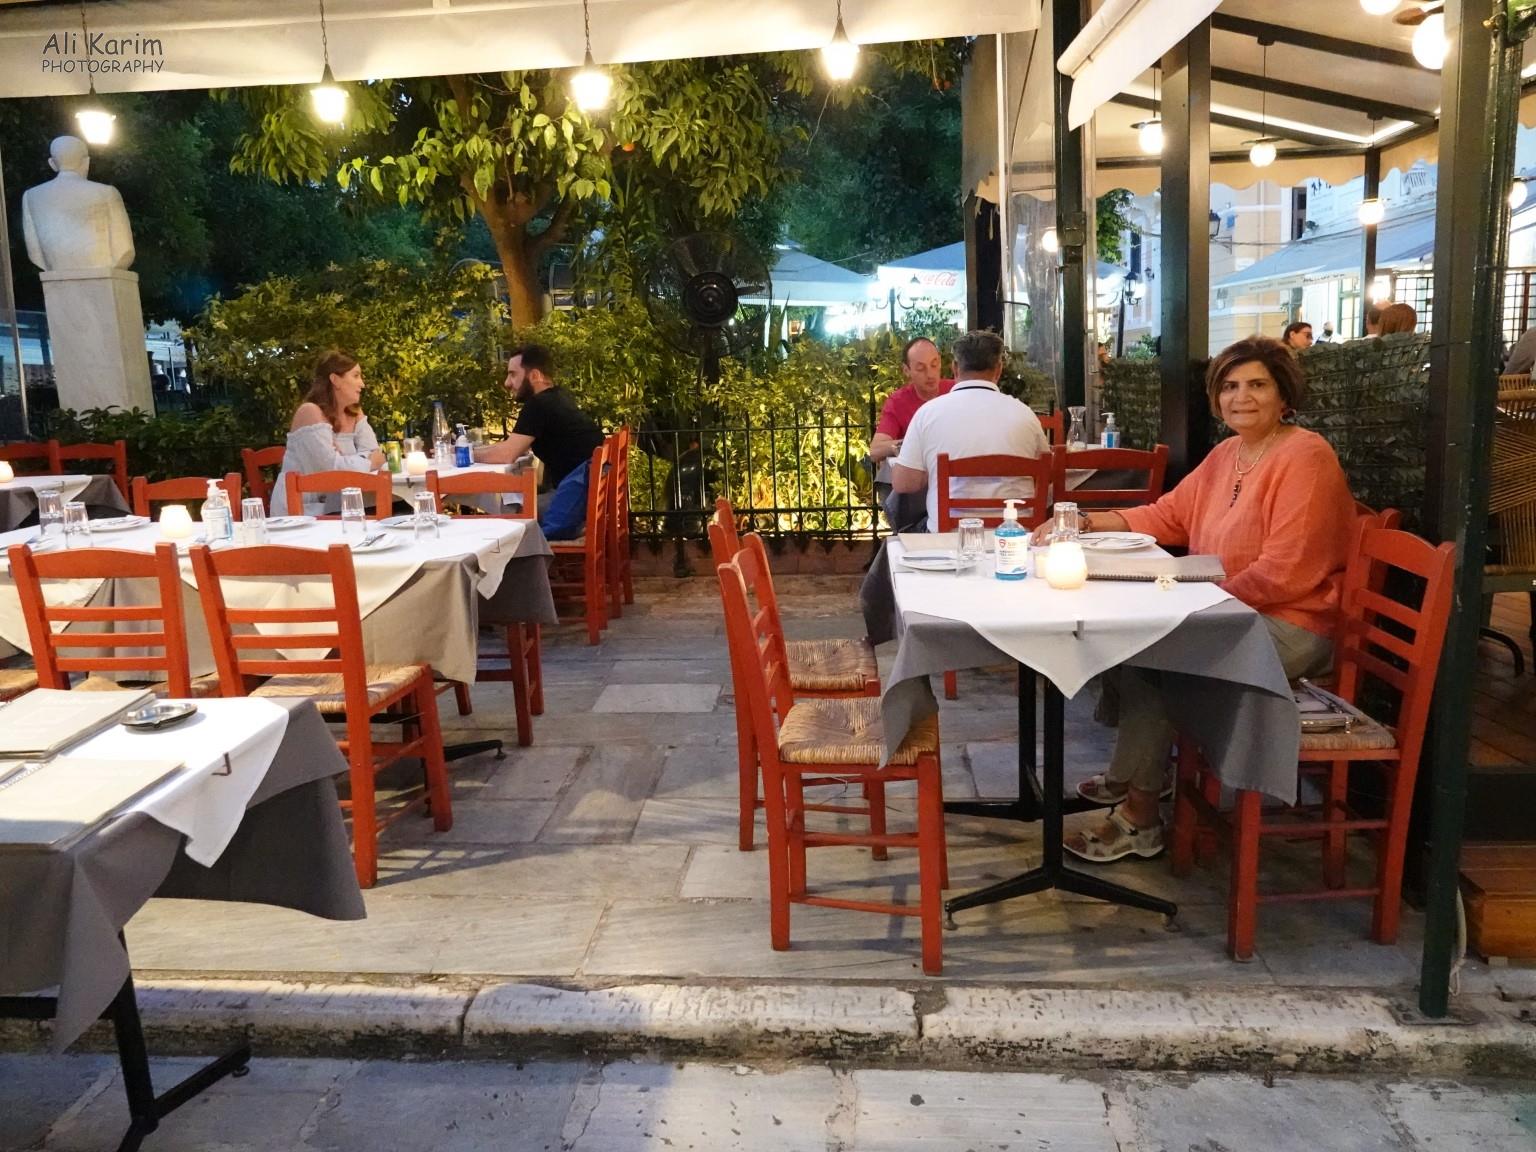 Athens, Greece, June, 2021, Ancient squares with lots of dining experiences